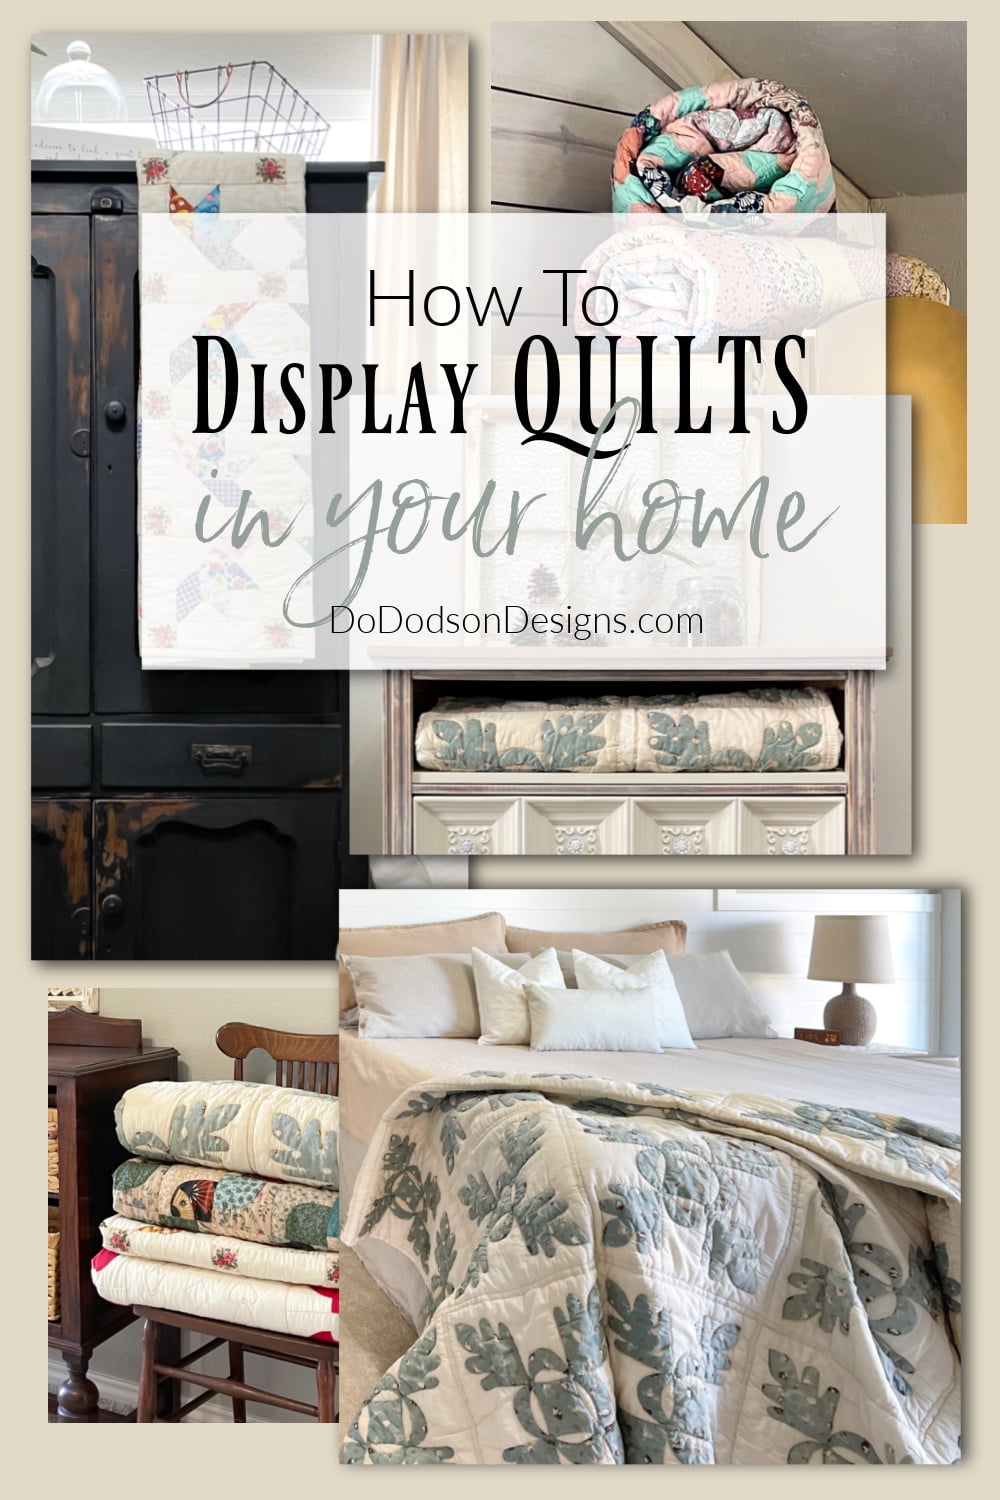 7 Charming Ways To Display Quilts In Your Home